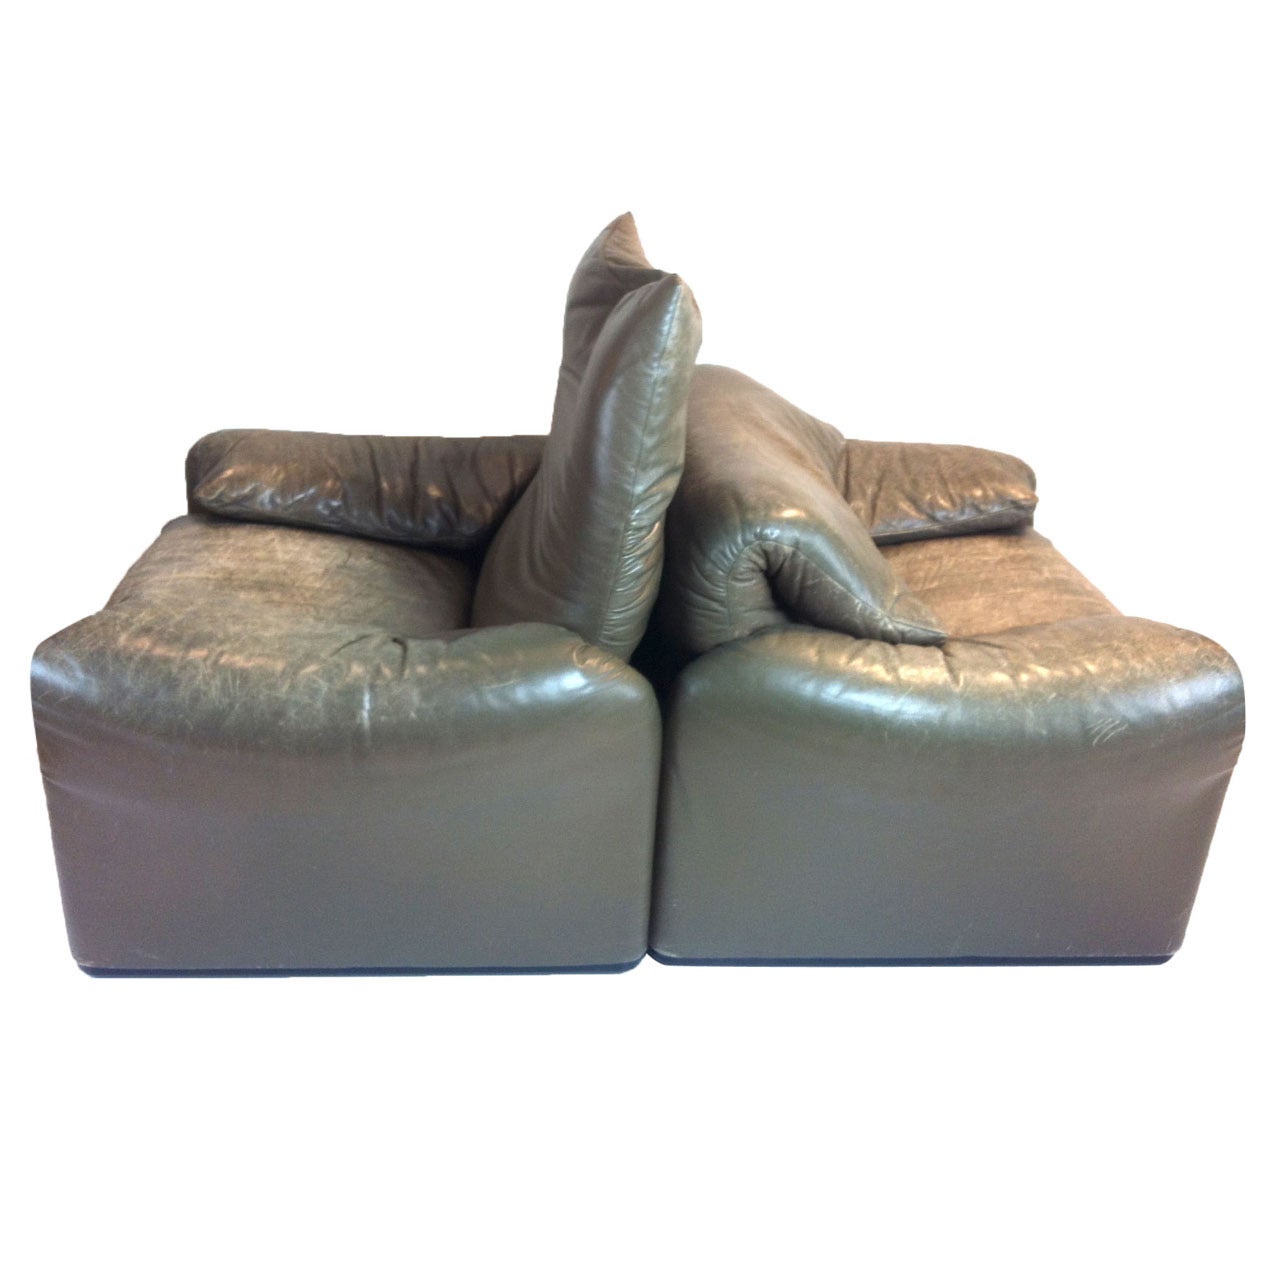 Pair of Lounge Chairs with Ottoman by Vico Magistretti for Cassina